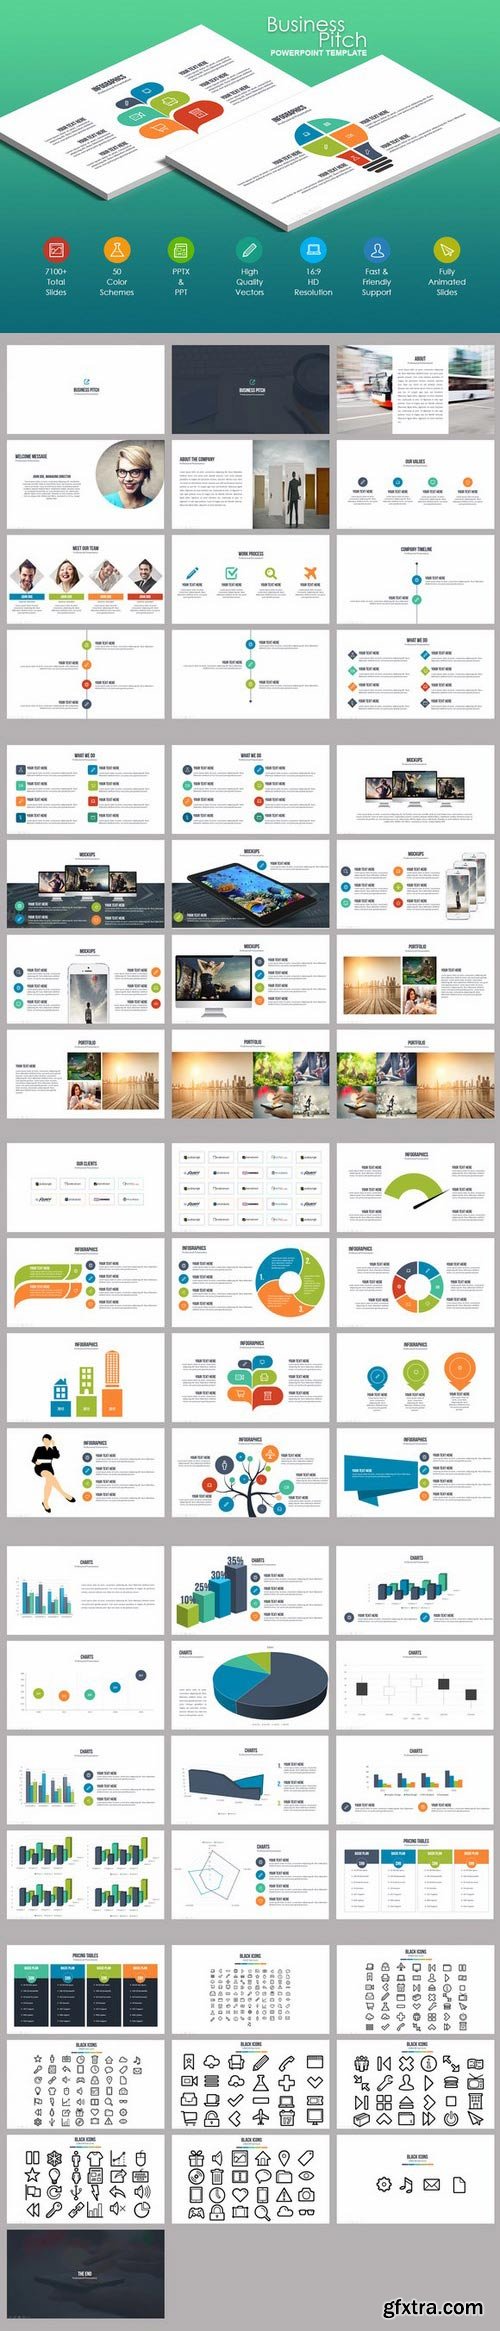 CM - Business Pitch Powerpoint Template 709980